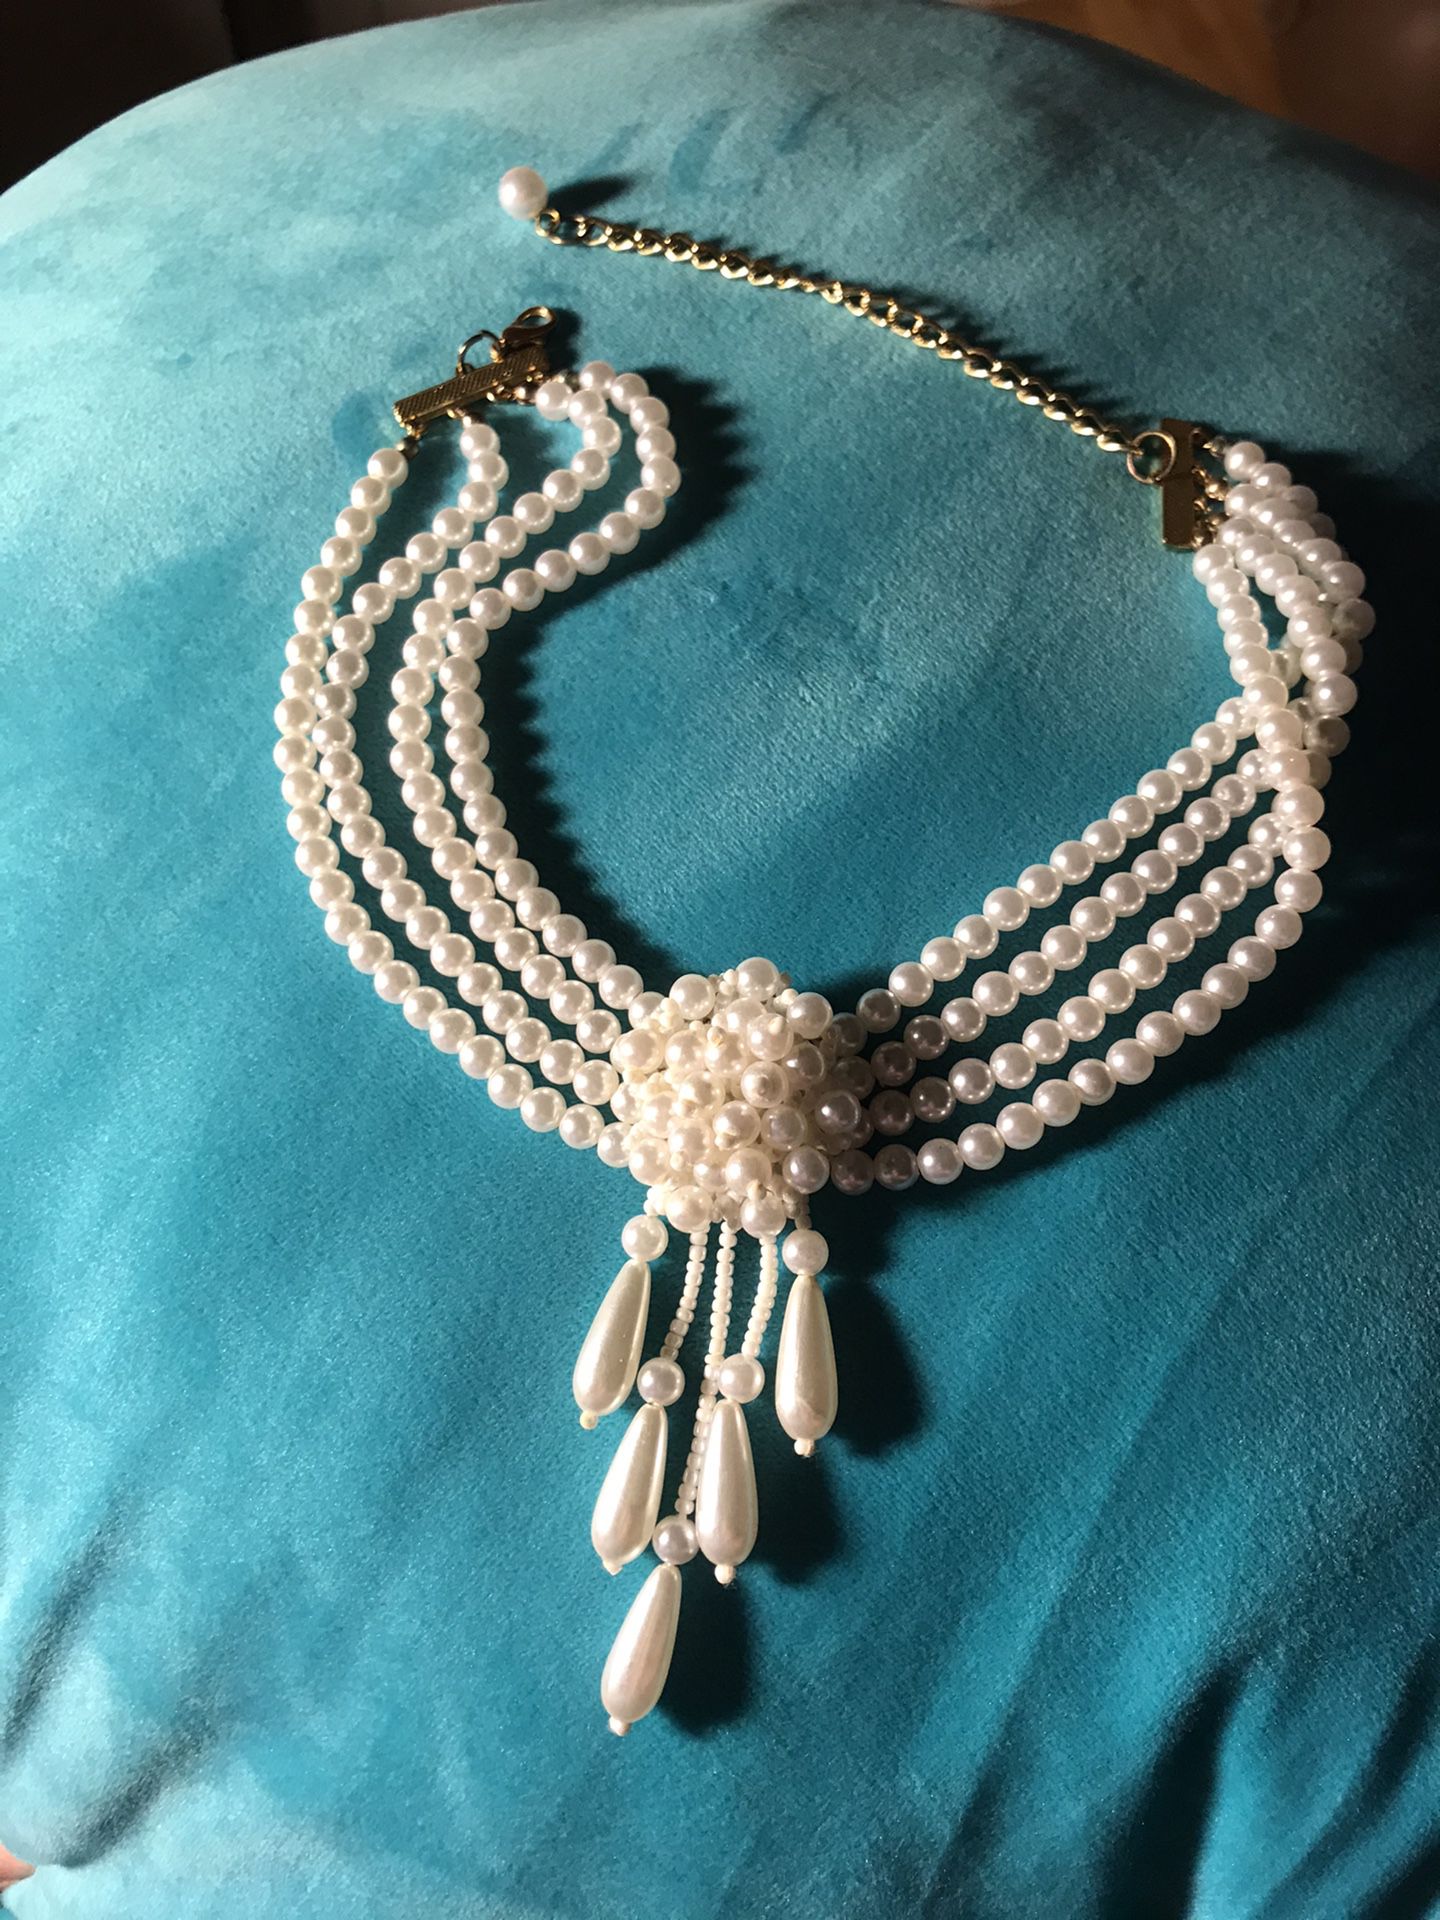 Cluster pearl necklace in perfect condition